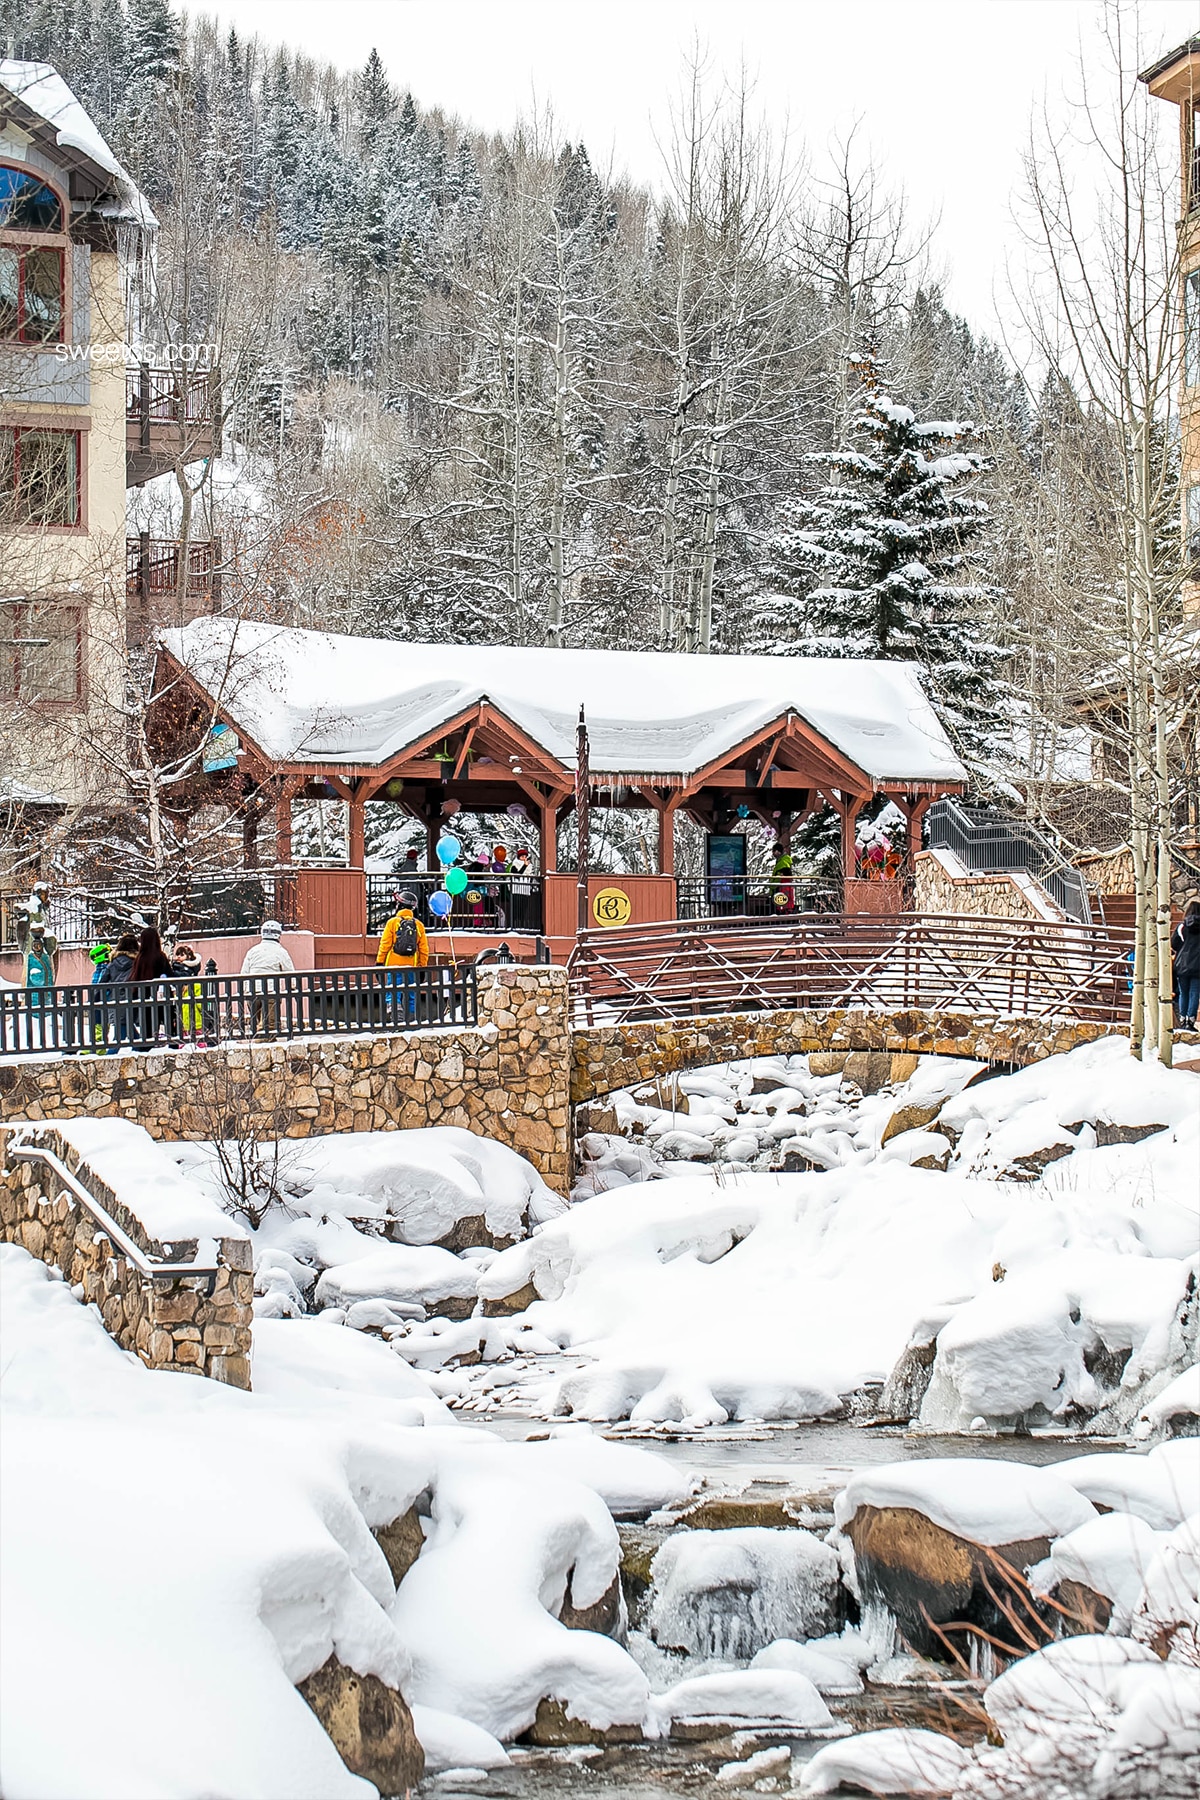 Beaver Creek Colorado- my favorite place to visit in summer or winter!